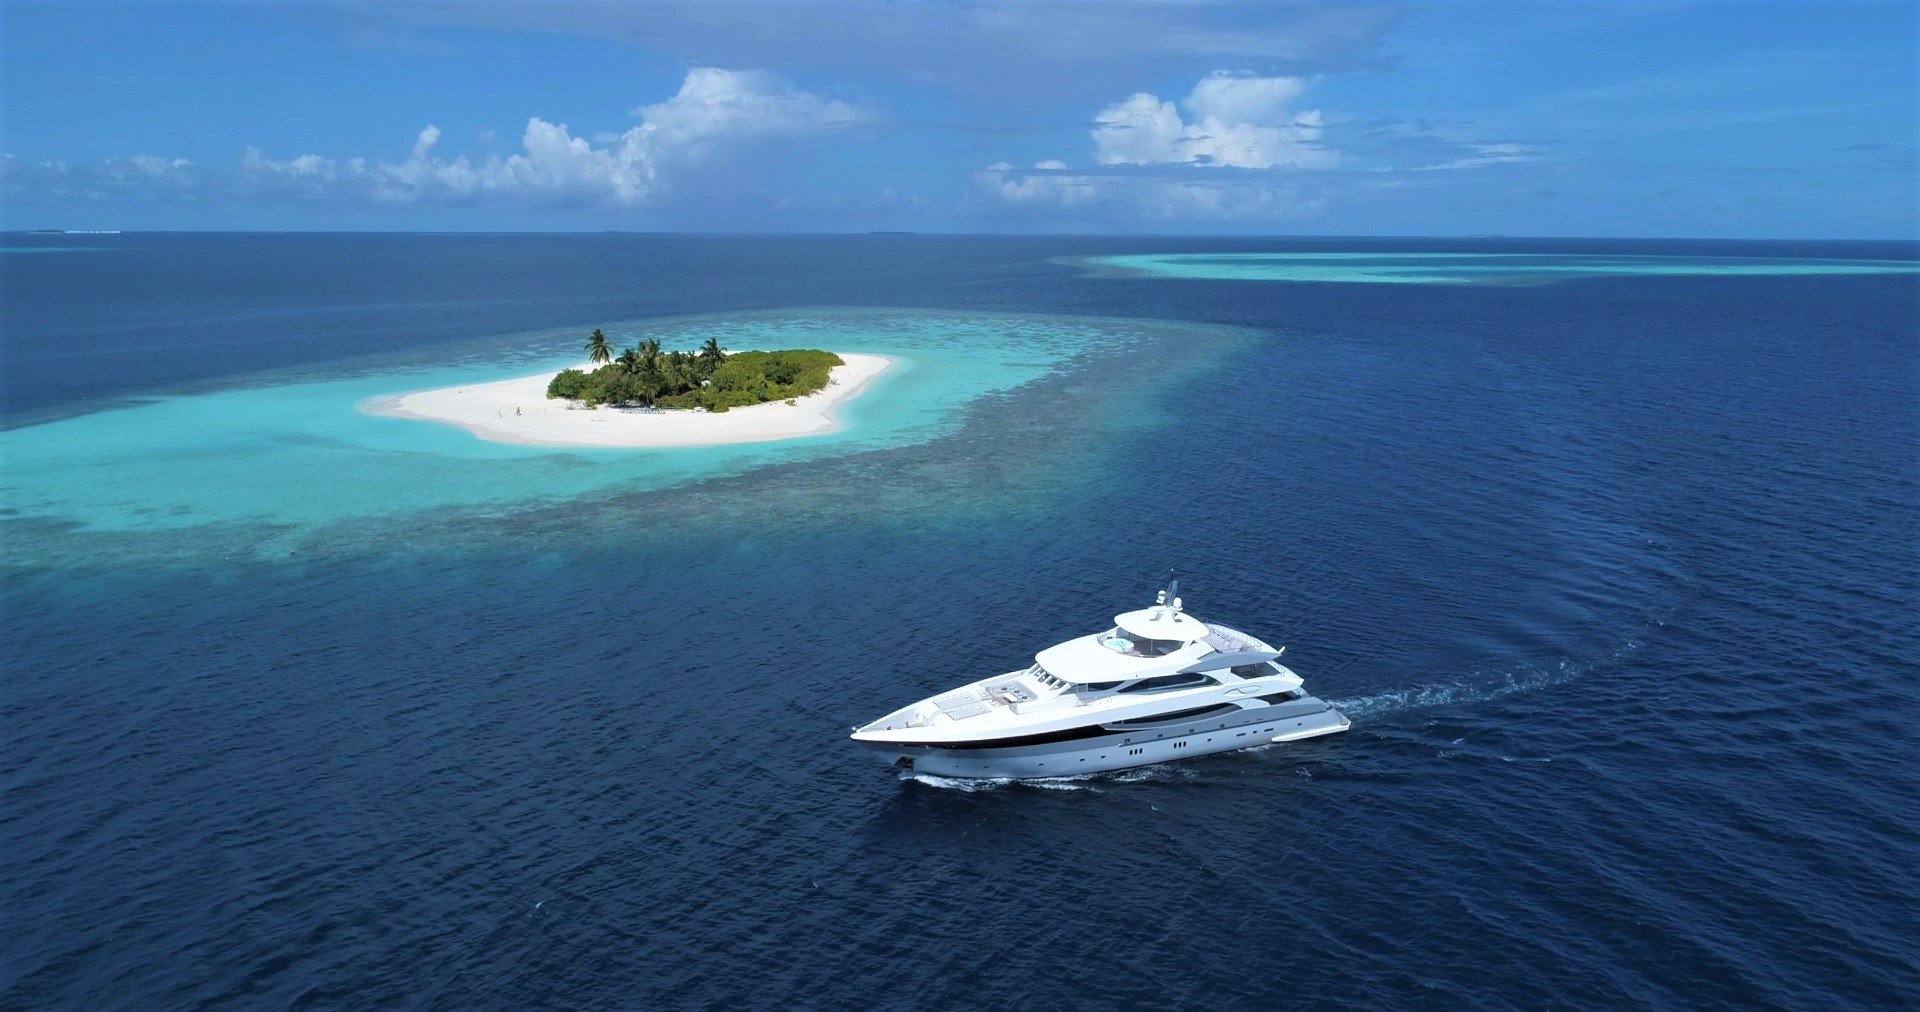 All Aboard the Liveaboard! Now you can take to the endless waters in Maldives.